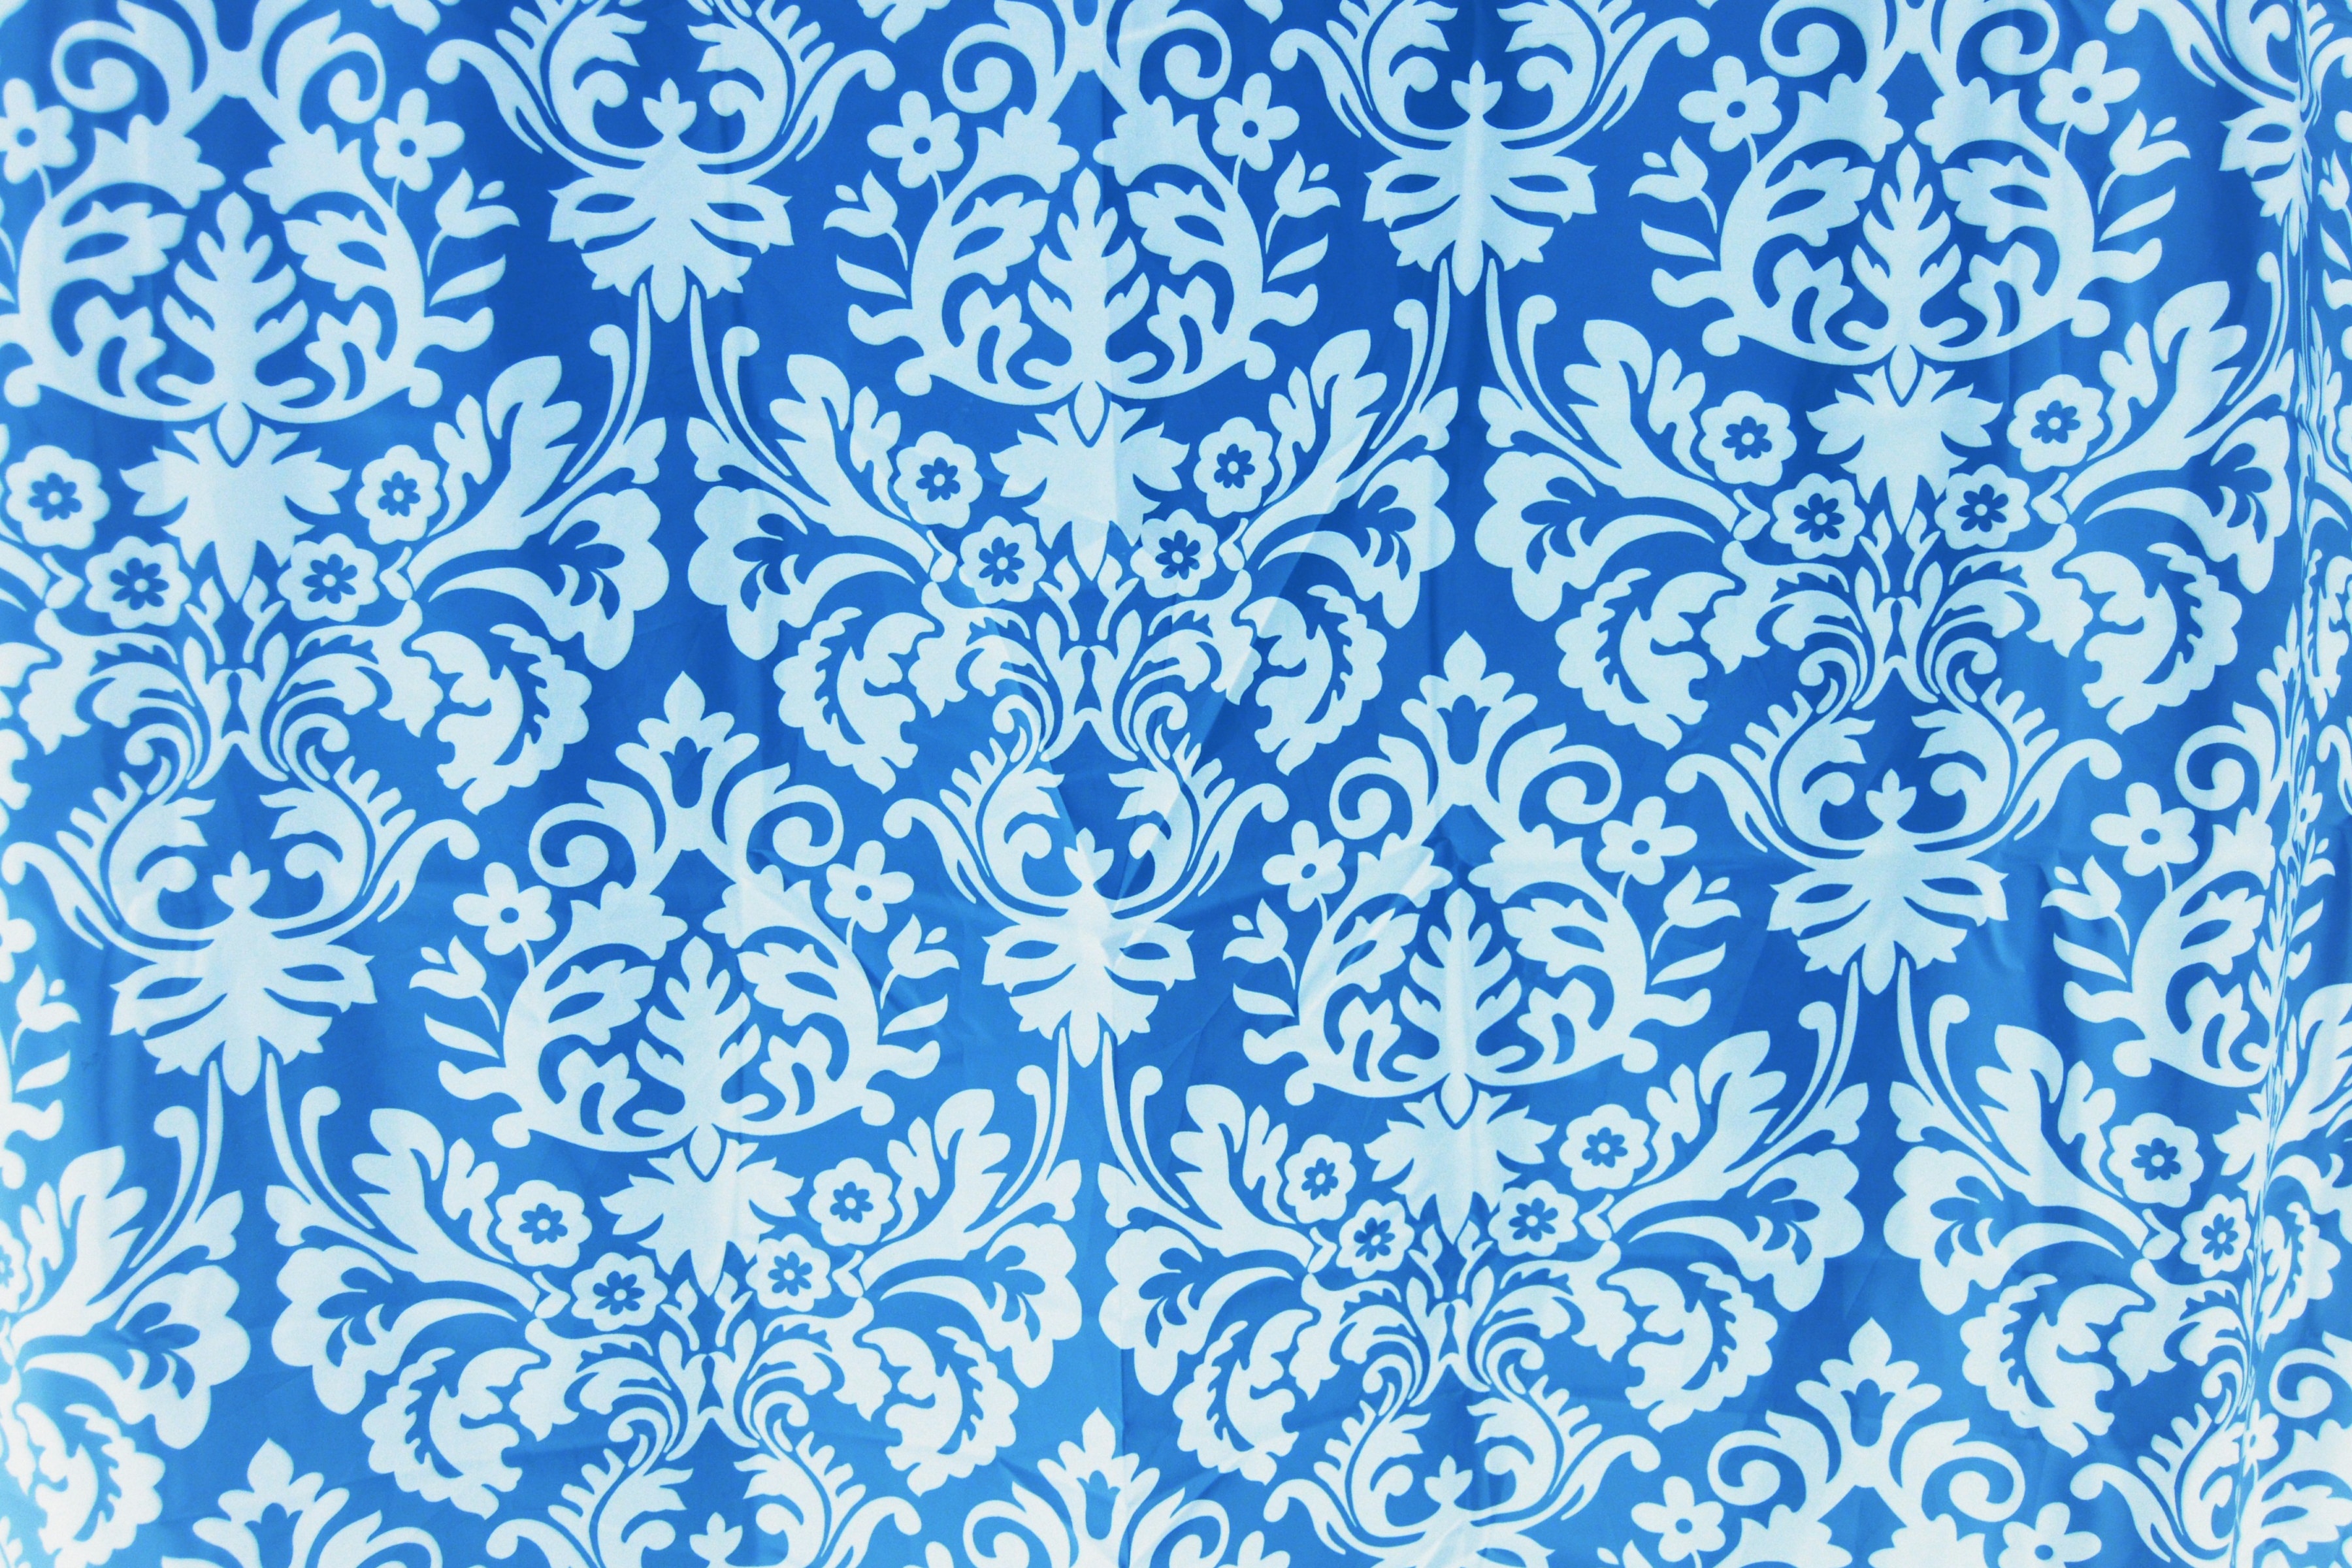 Texture, Tissue, Blue, pattern, old-fashioned